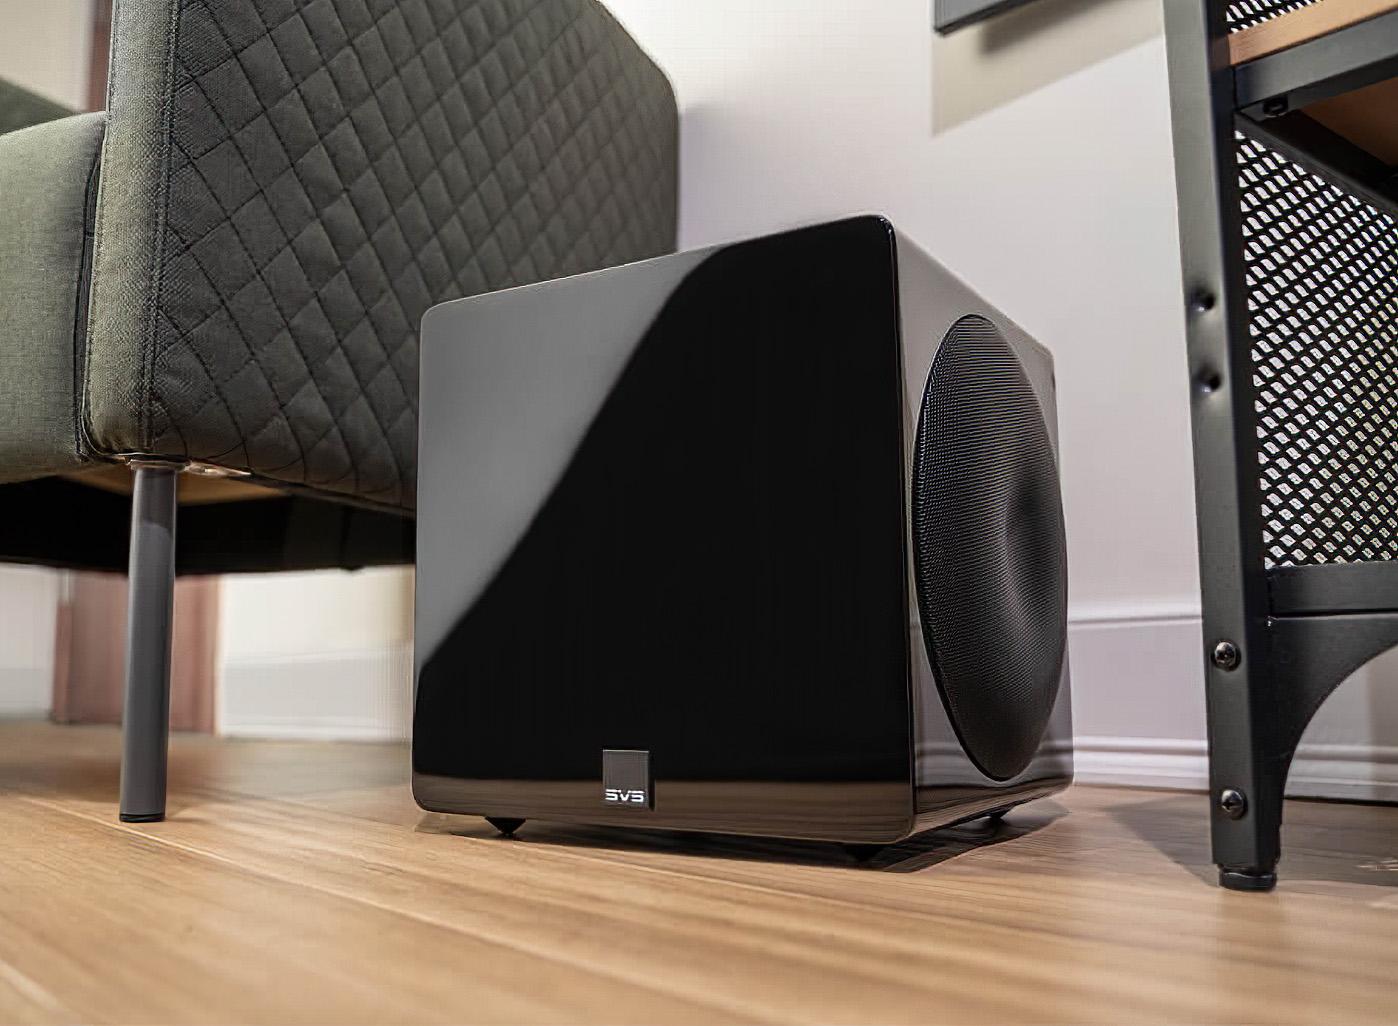 span sne hvid kollision Best 8-Inch Subwoofers for Your Home - Premium Sound in a Small Package -  HomeTheaterReview